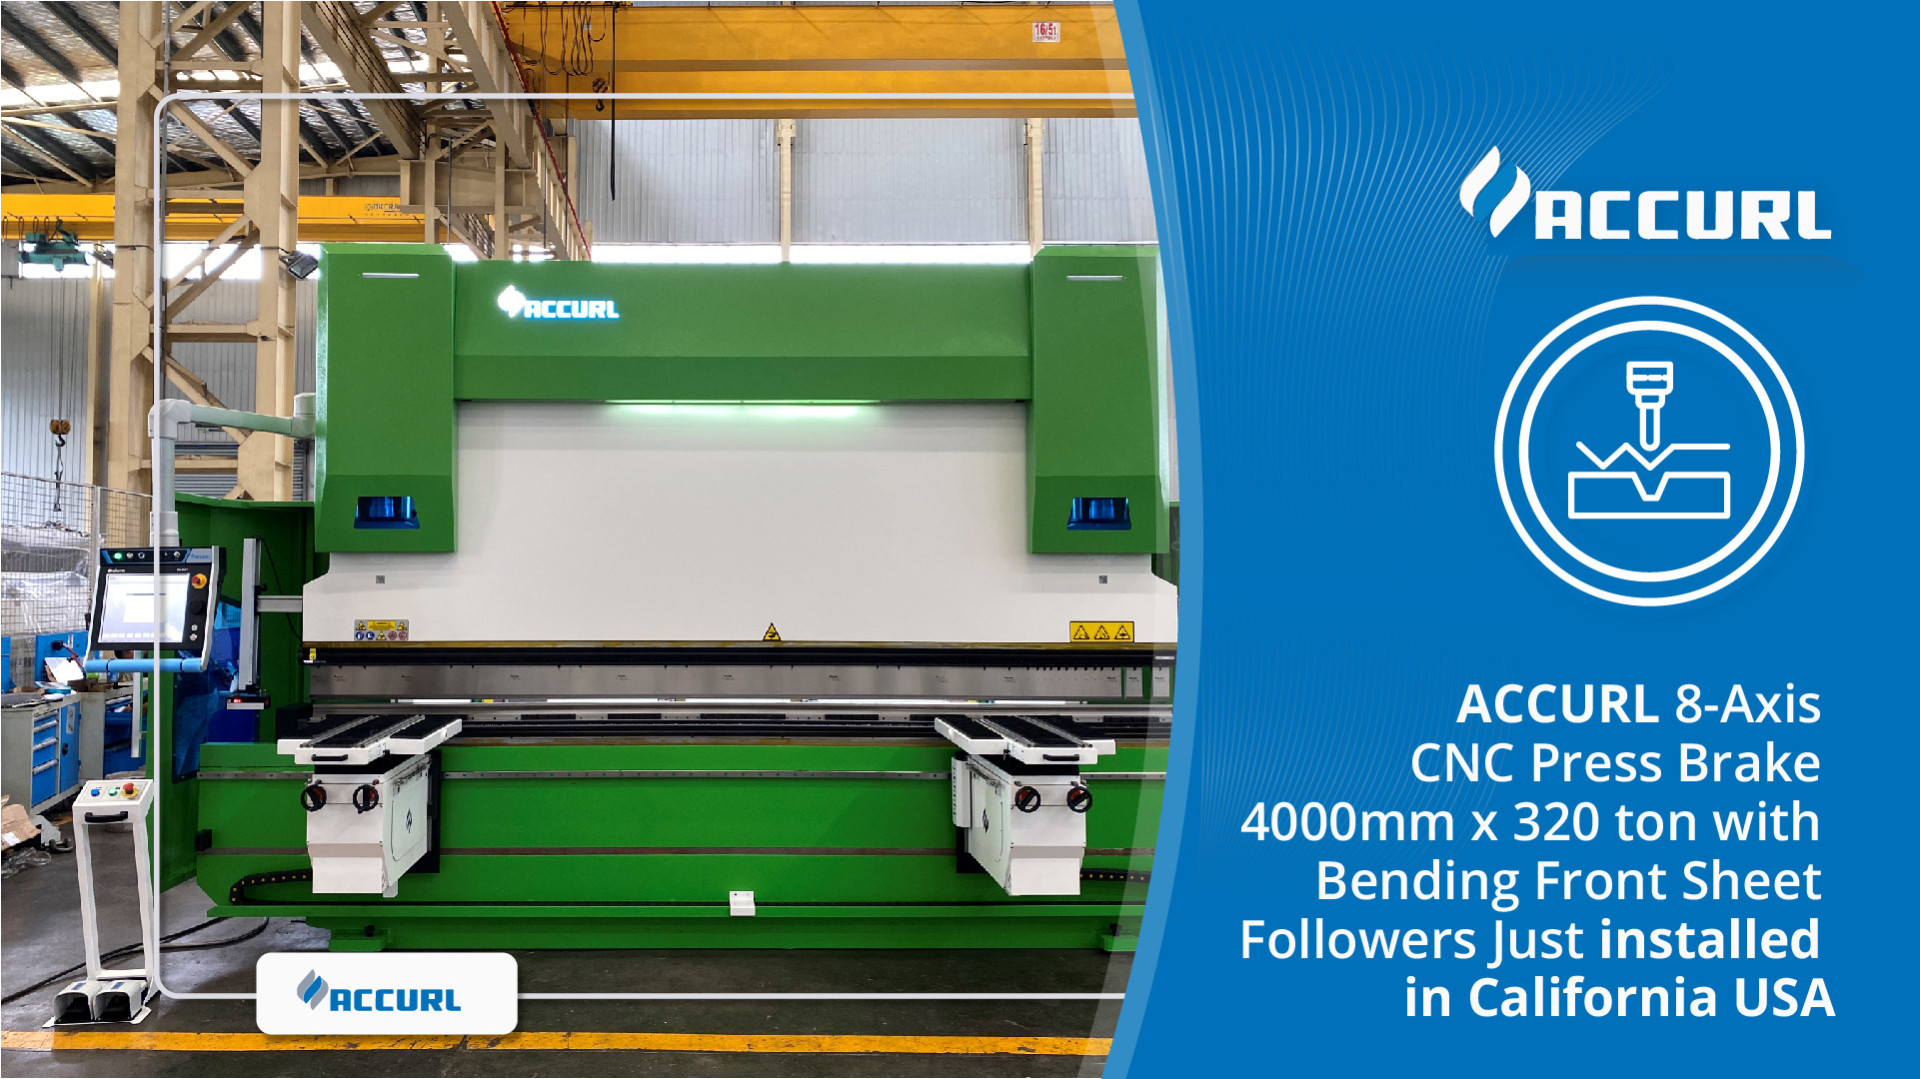 ACCURL 8-Axis CNC Press Brake 4000mm x 320 ton with Bending Front Sheet Followers Just installed in California USA